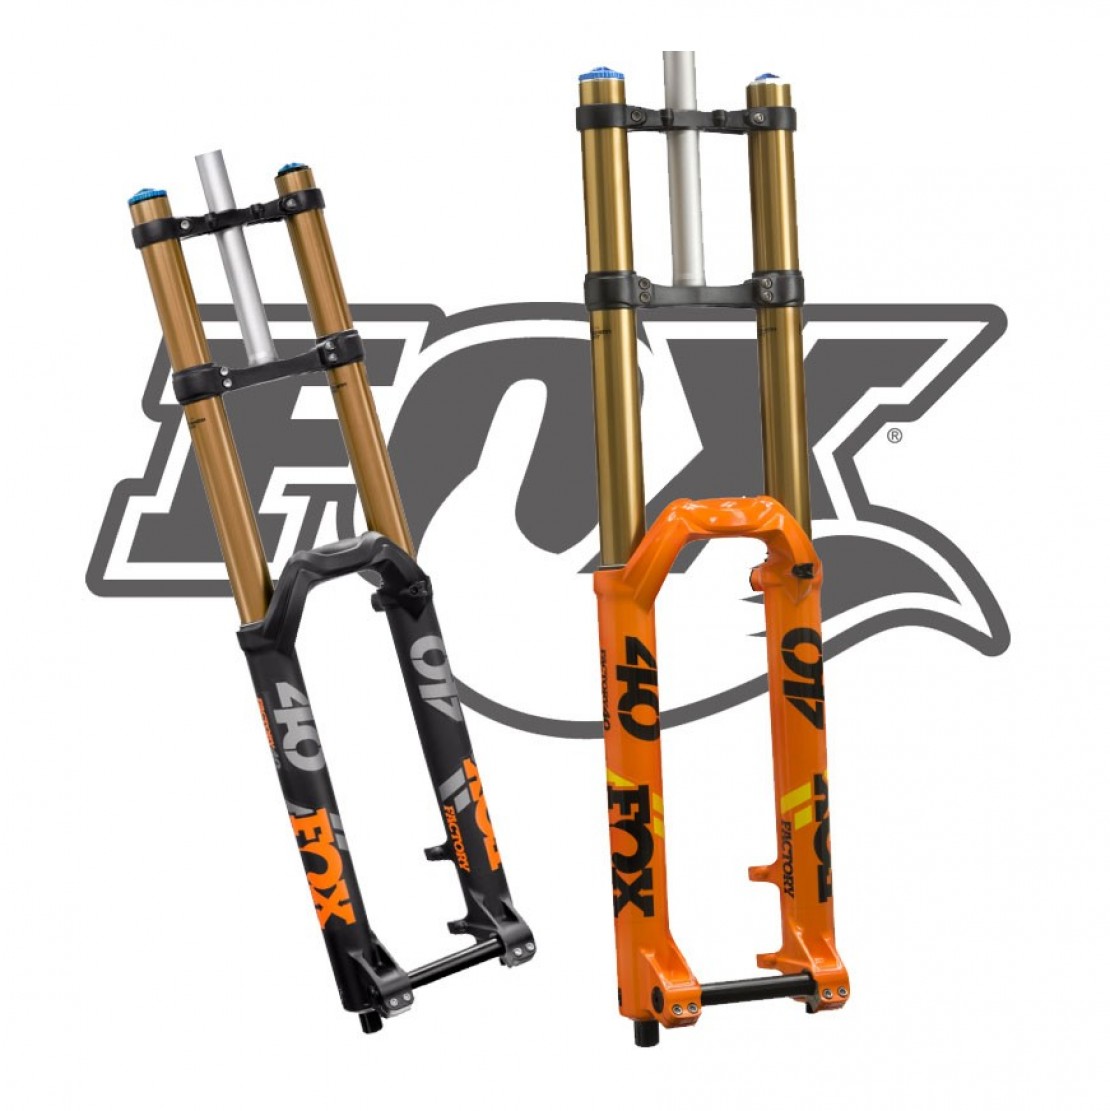 FOX 40 Float Factory GRIP2 1.125 Fork 2019 Accessories, Damian Harris  Cycles